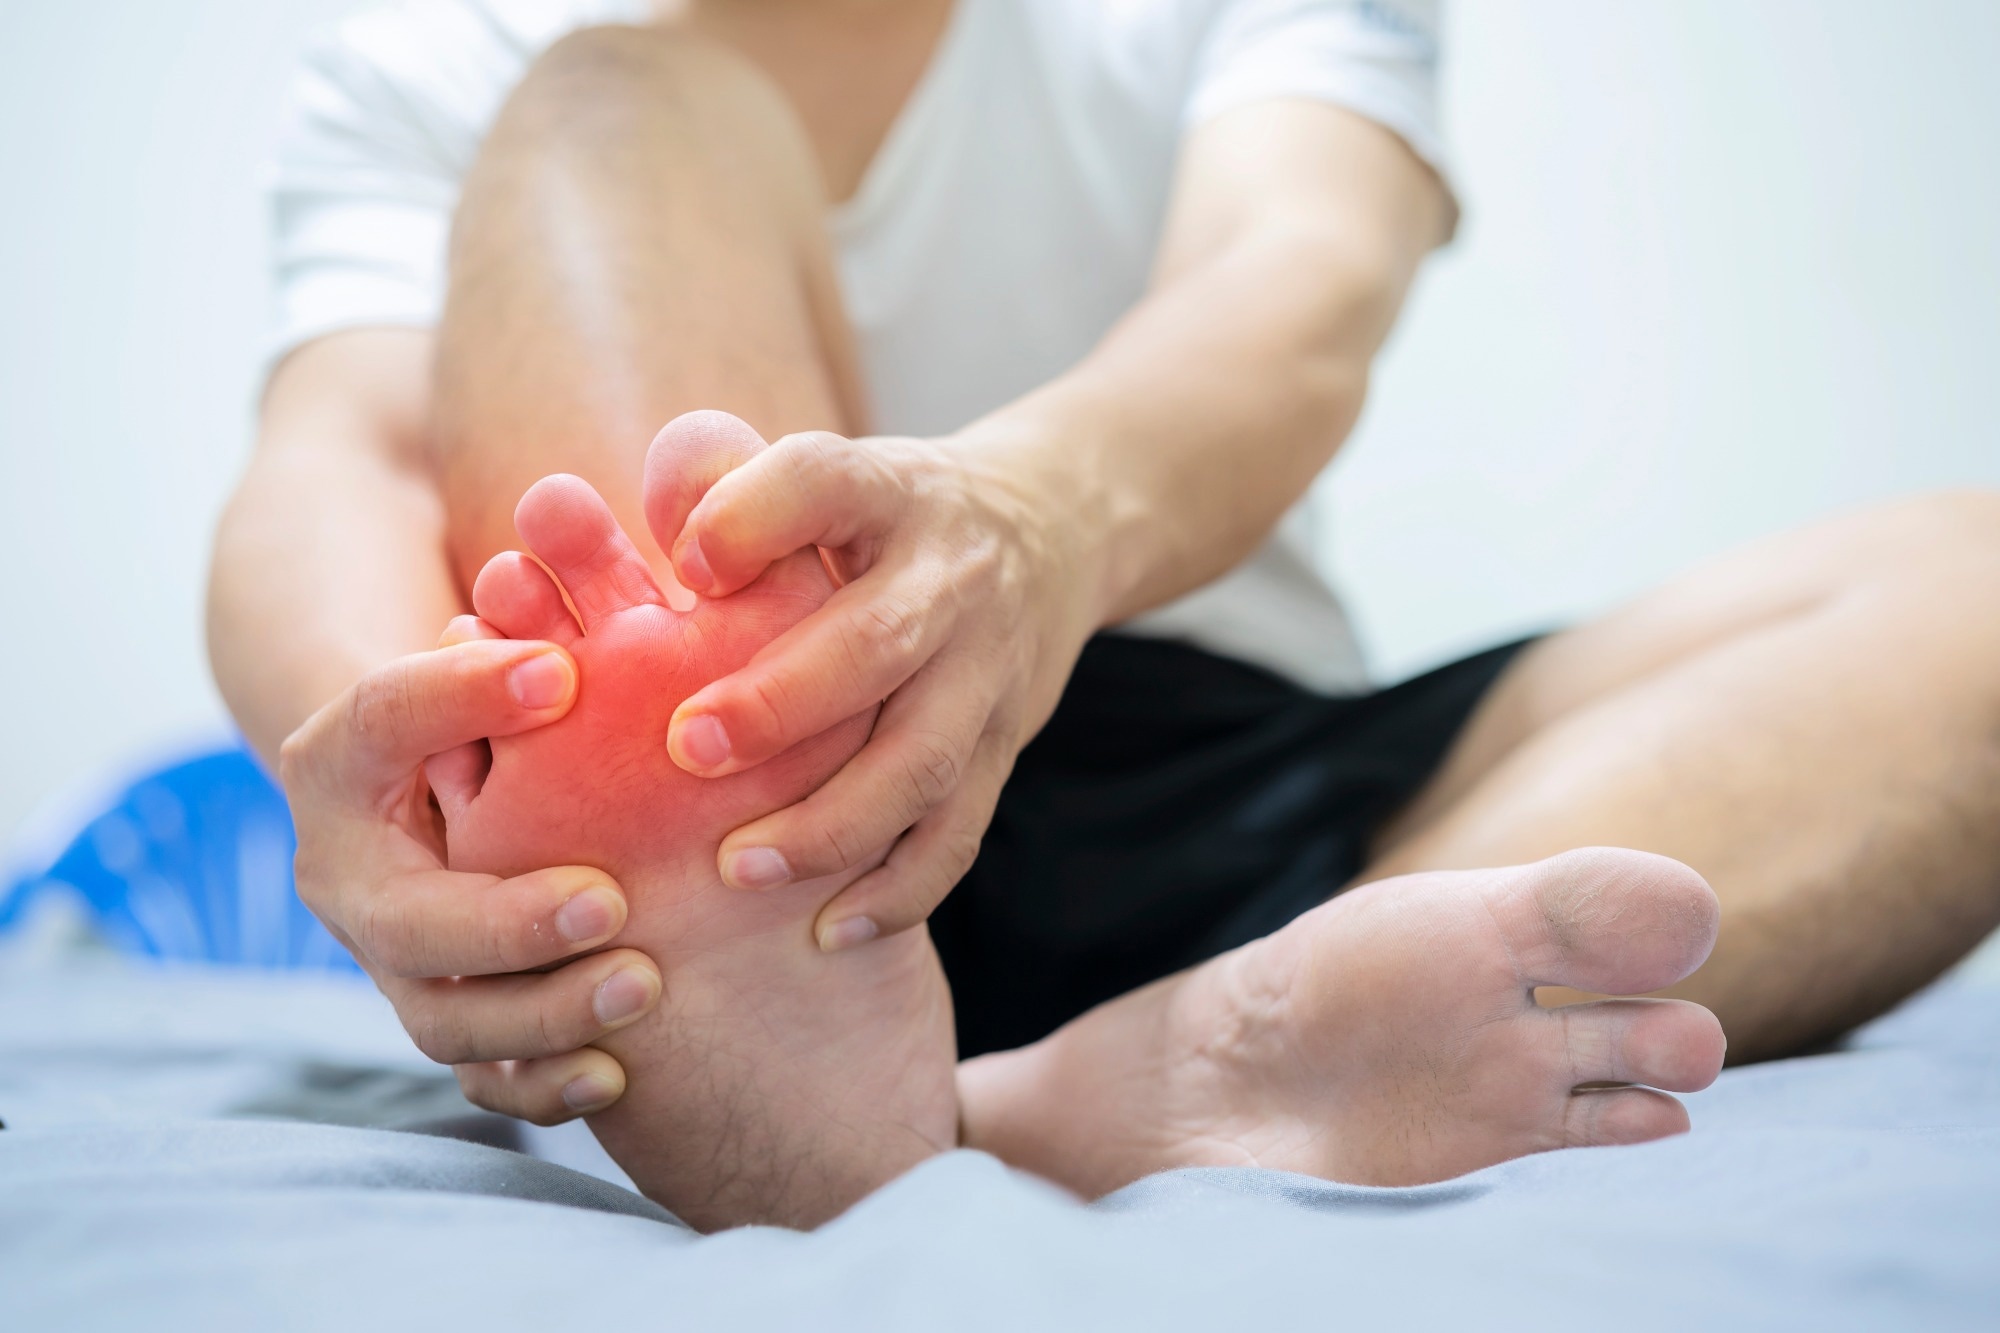 Study: Analysis of Metabolites in Gout: A Systematic Review and Meta-Analysis. Image Credit: jittawit21/Shutterstock.com